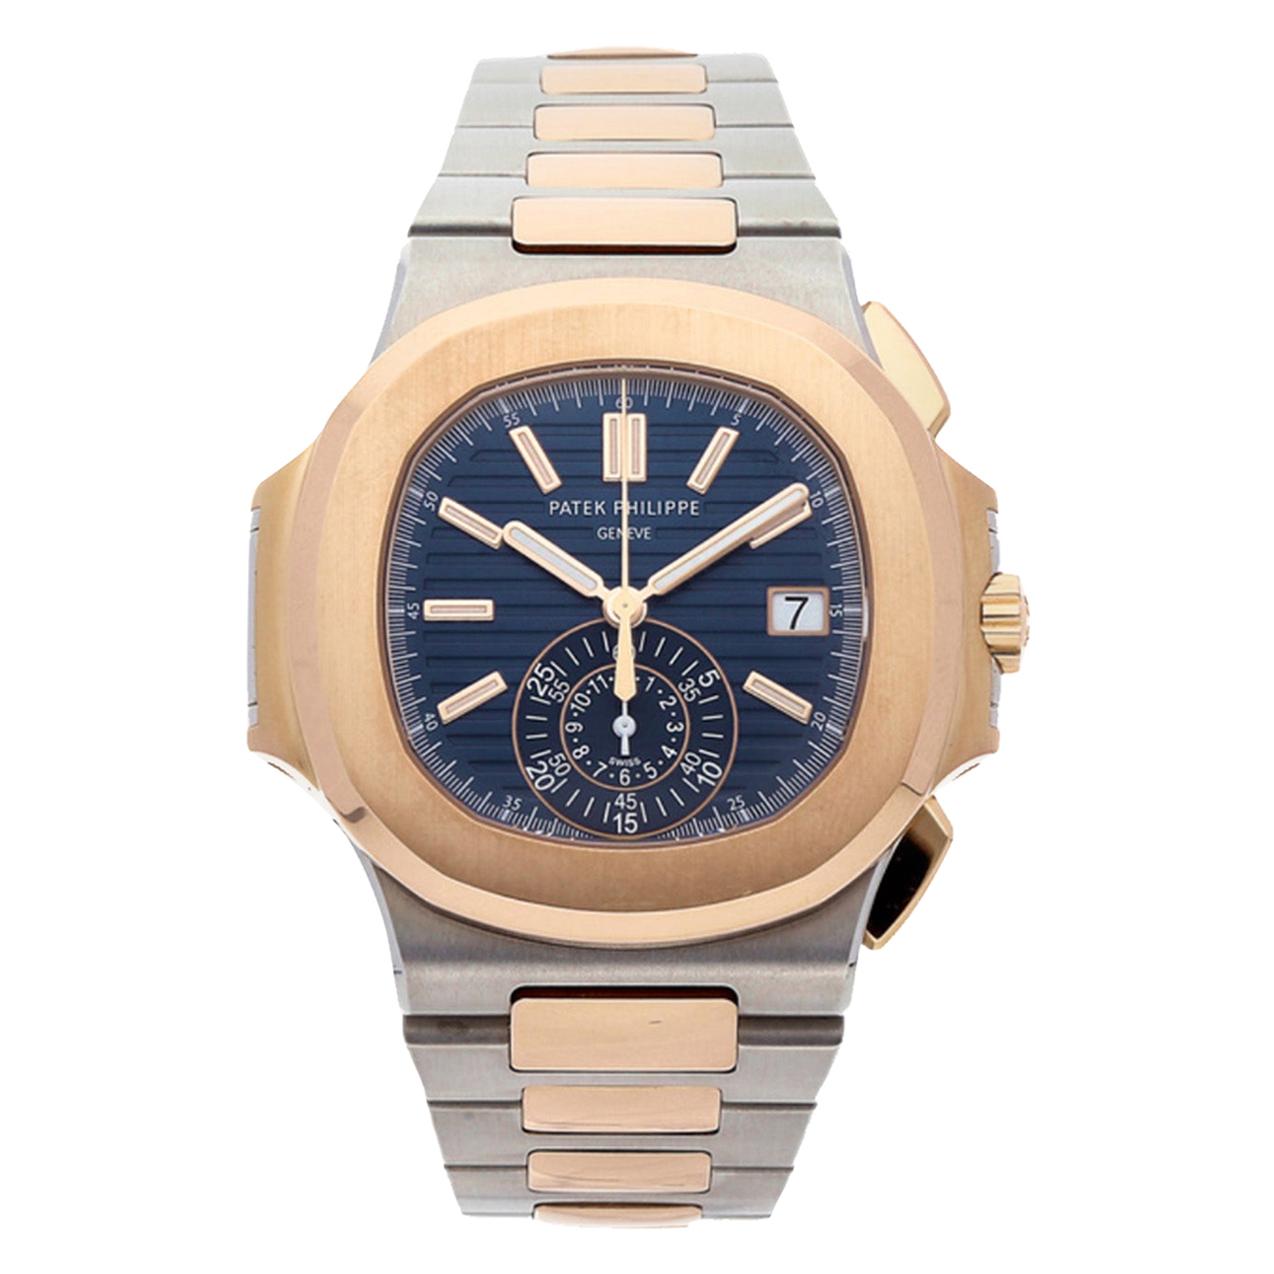 Patek Philippe 5980/1AR-001 Chronograph Two-Tone Blue Dial Watch 40.5MM Watch